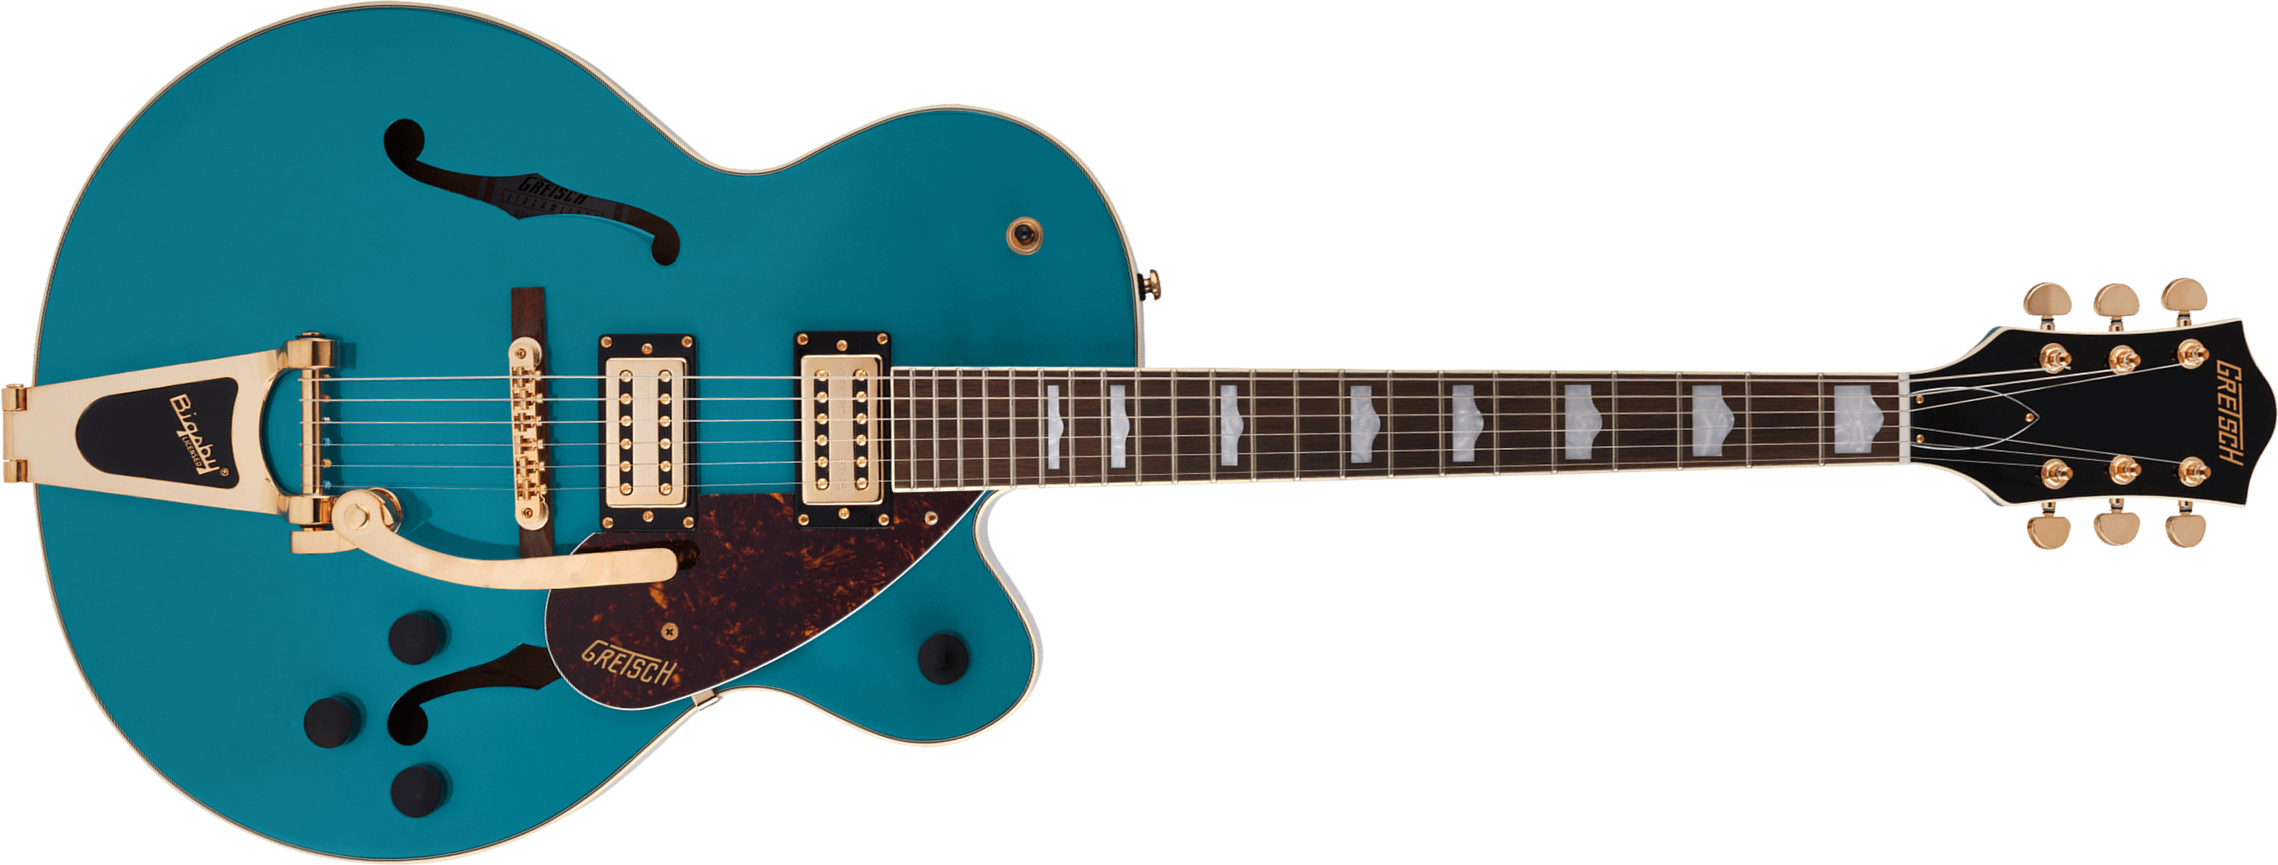 Gretsch G2410tg Streamliner Hollow Body Bigsby Gh Hh Trem Lau - Ocean Turquoise - Semi-Hollow E-Gitarre - Main picture